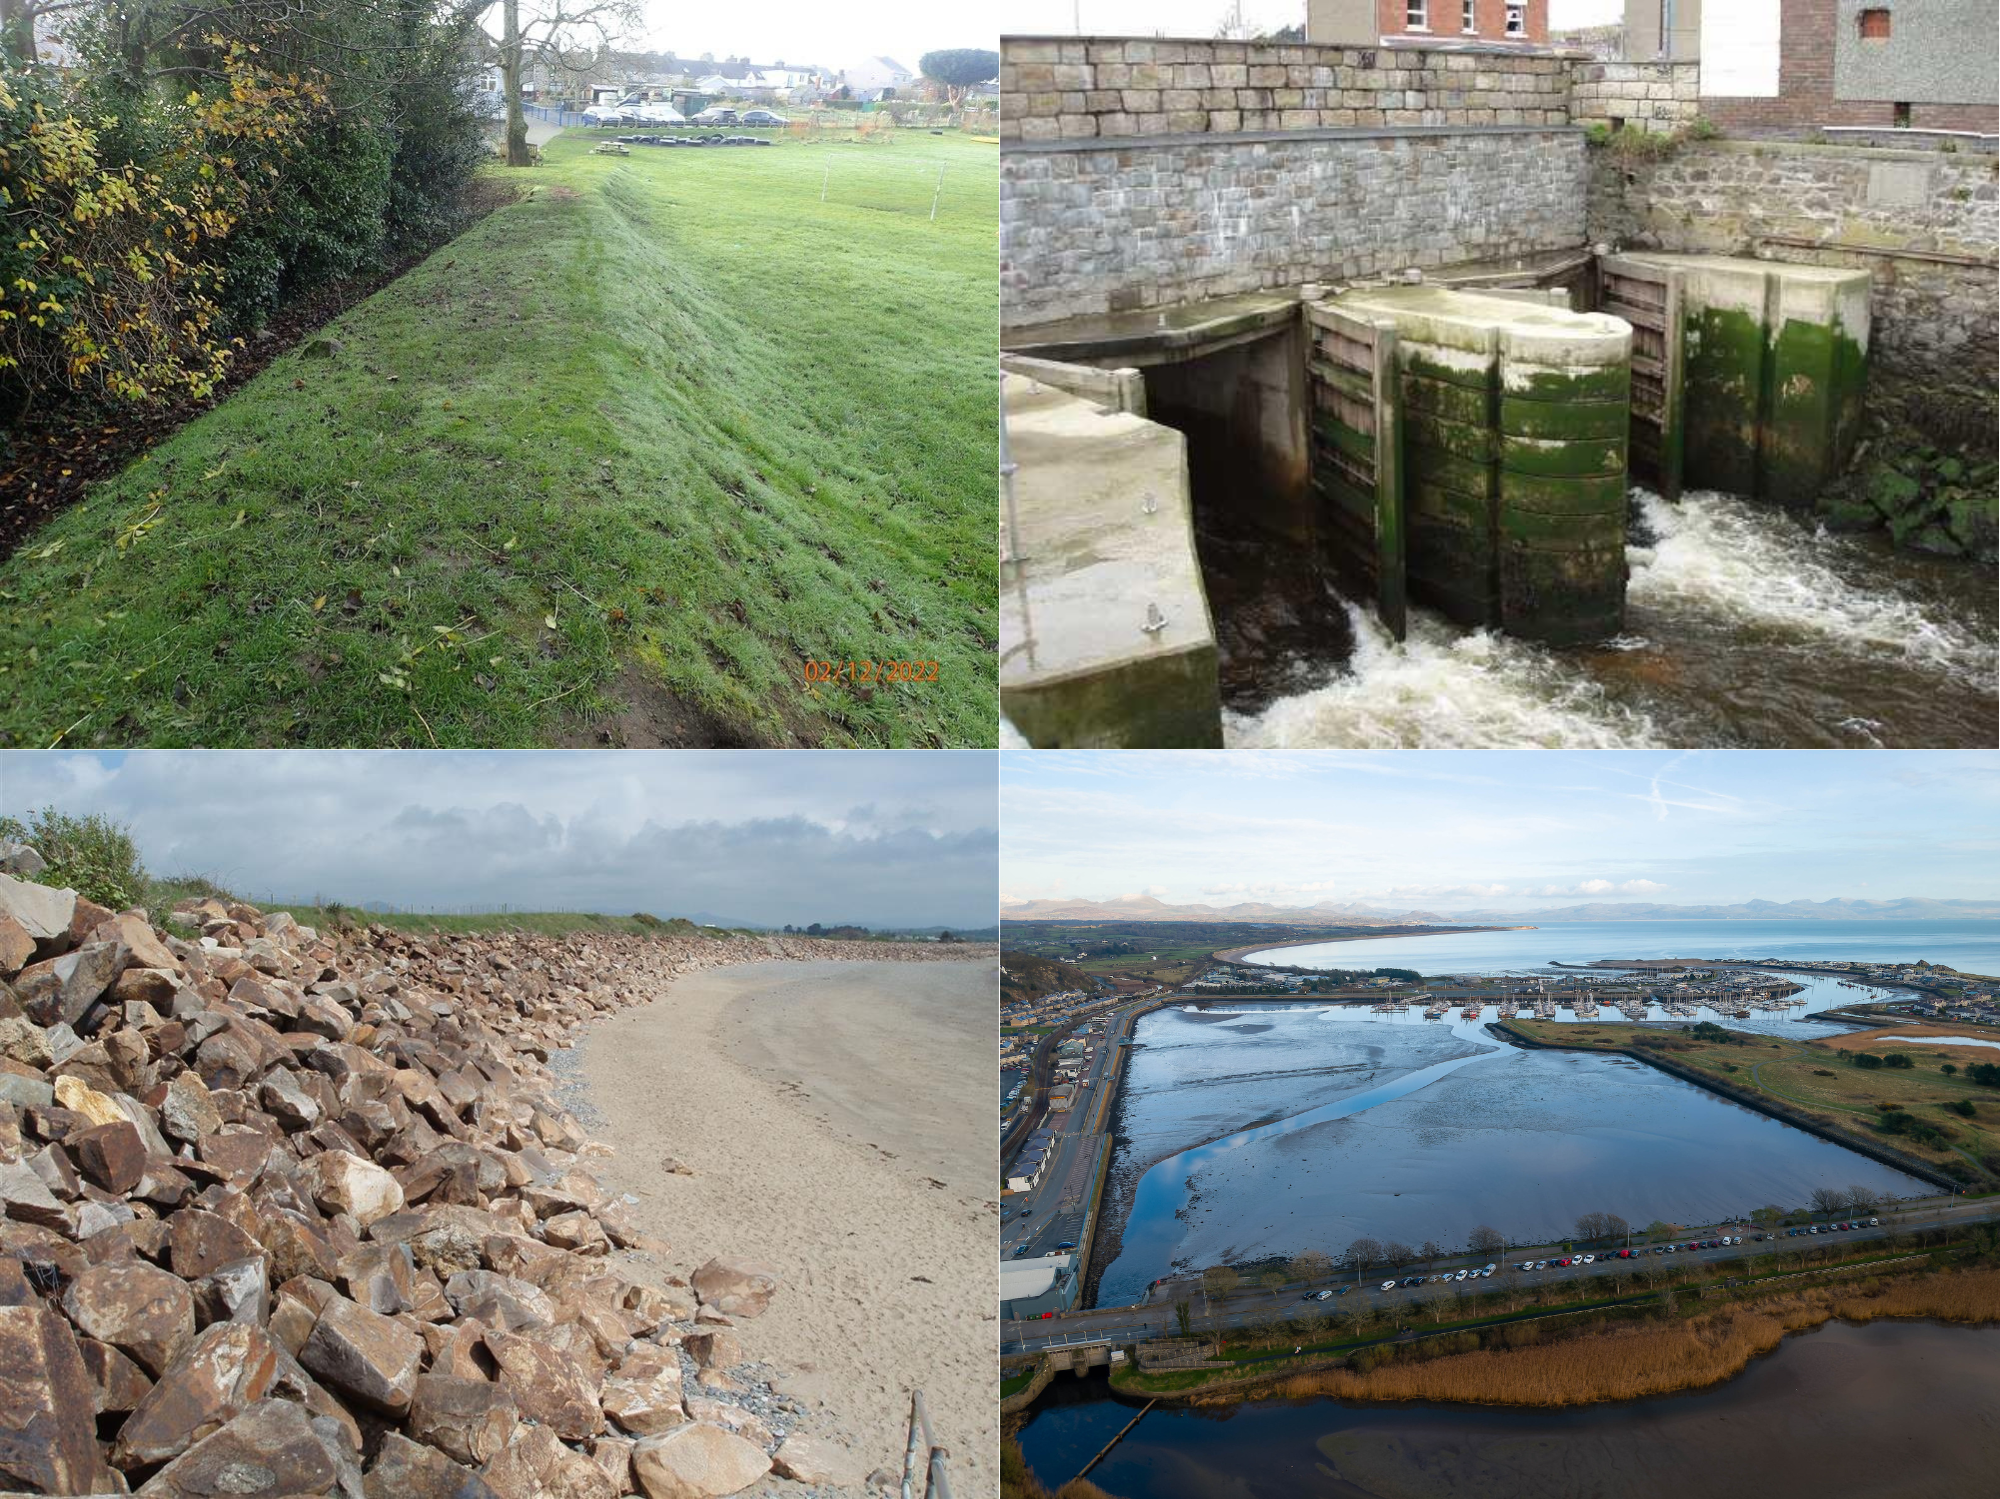 Photos of different types of flood defences